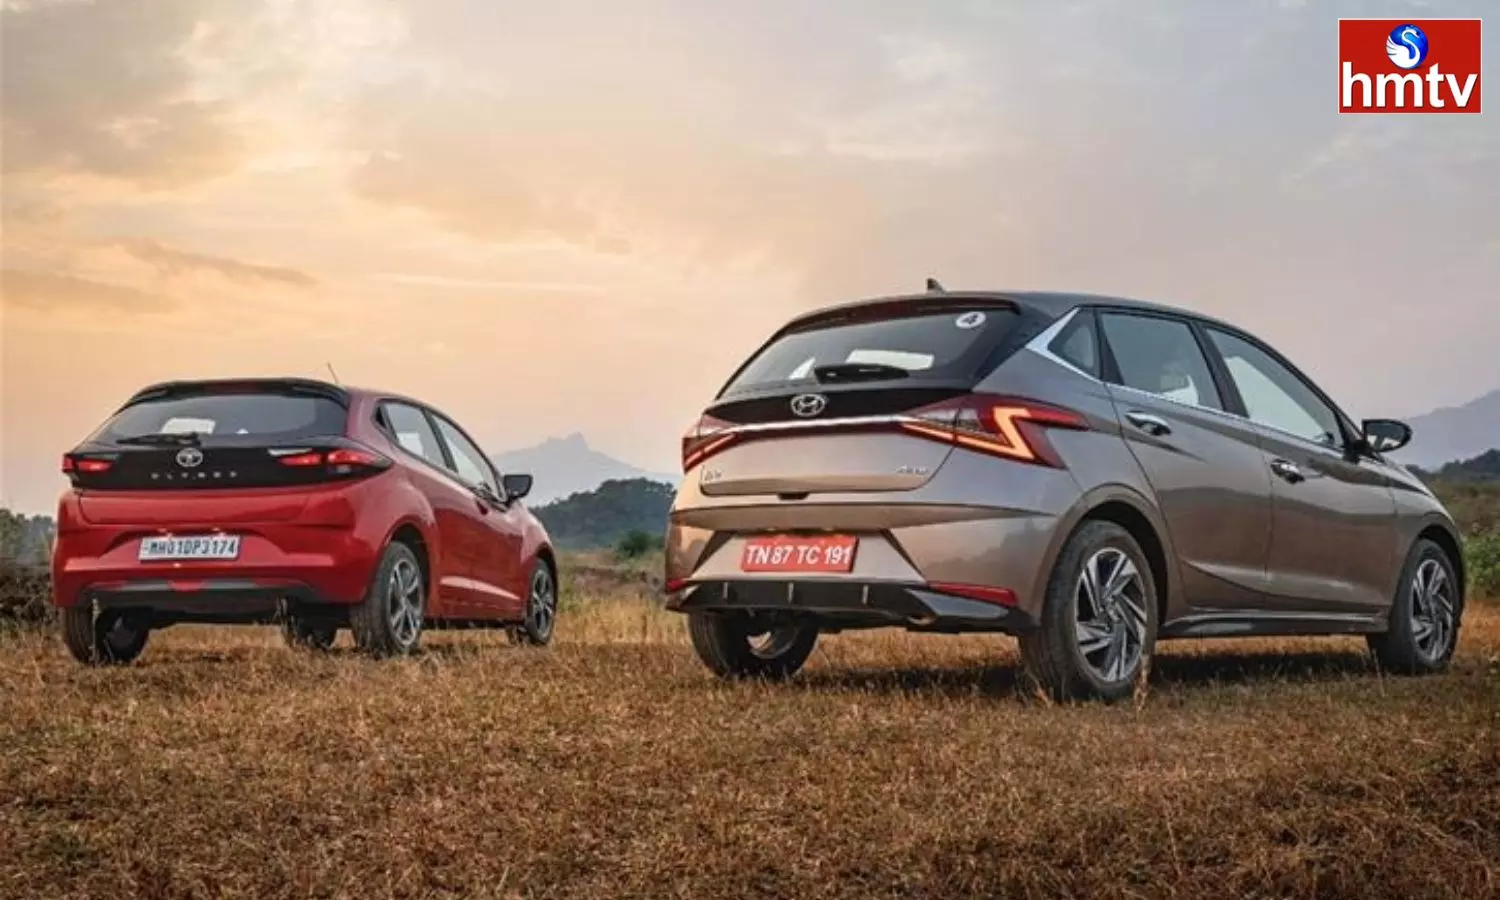 From Tata Altroz to Hyundai Extr these 4 affordable cars with sunroof under 10 lakh rupees